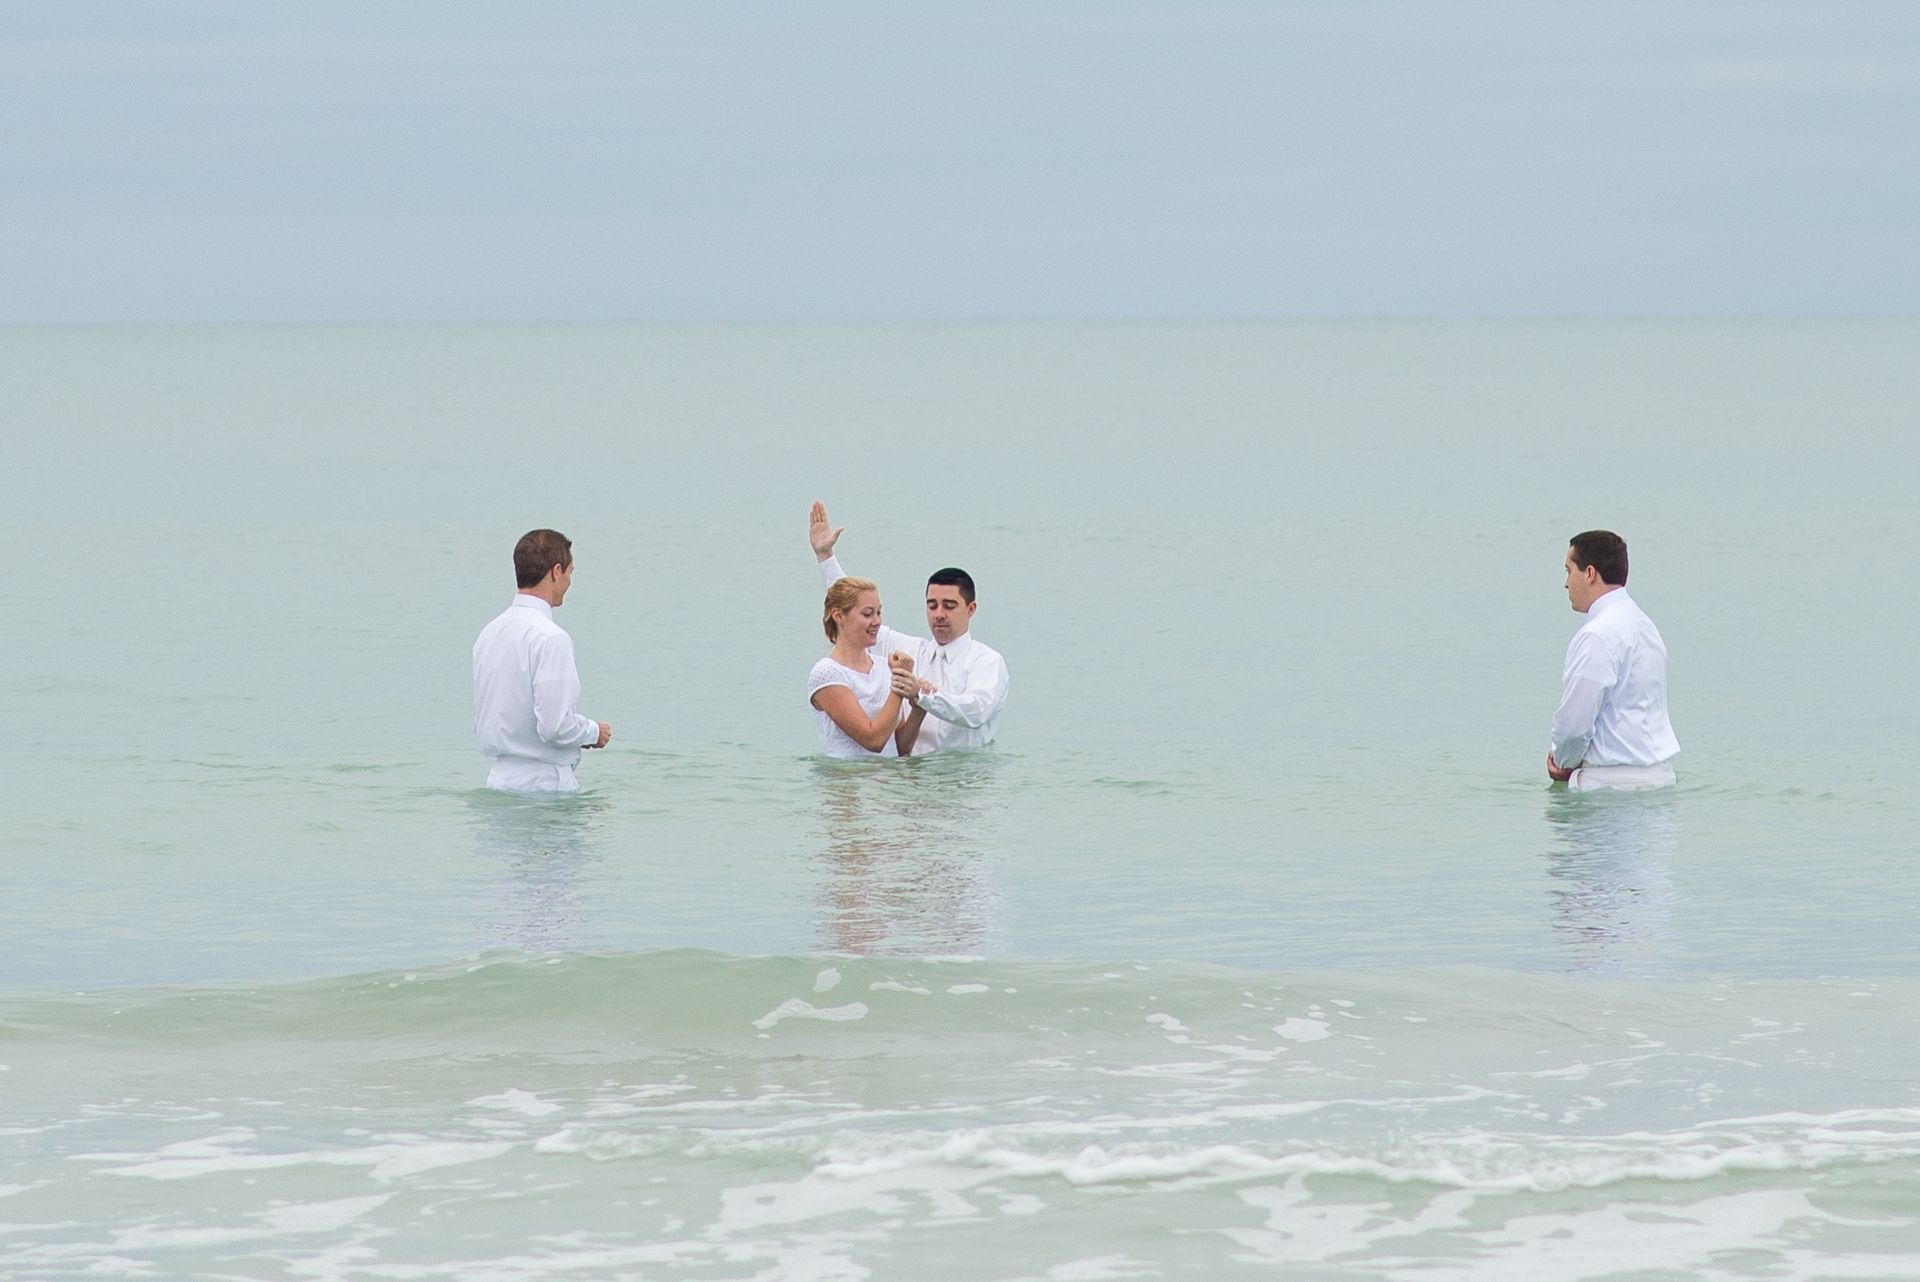 A young woman being baptized in the ocean.